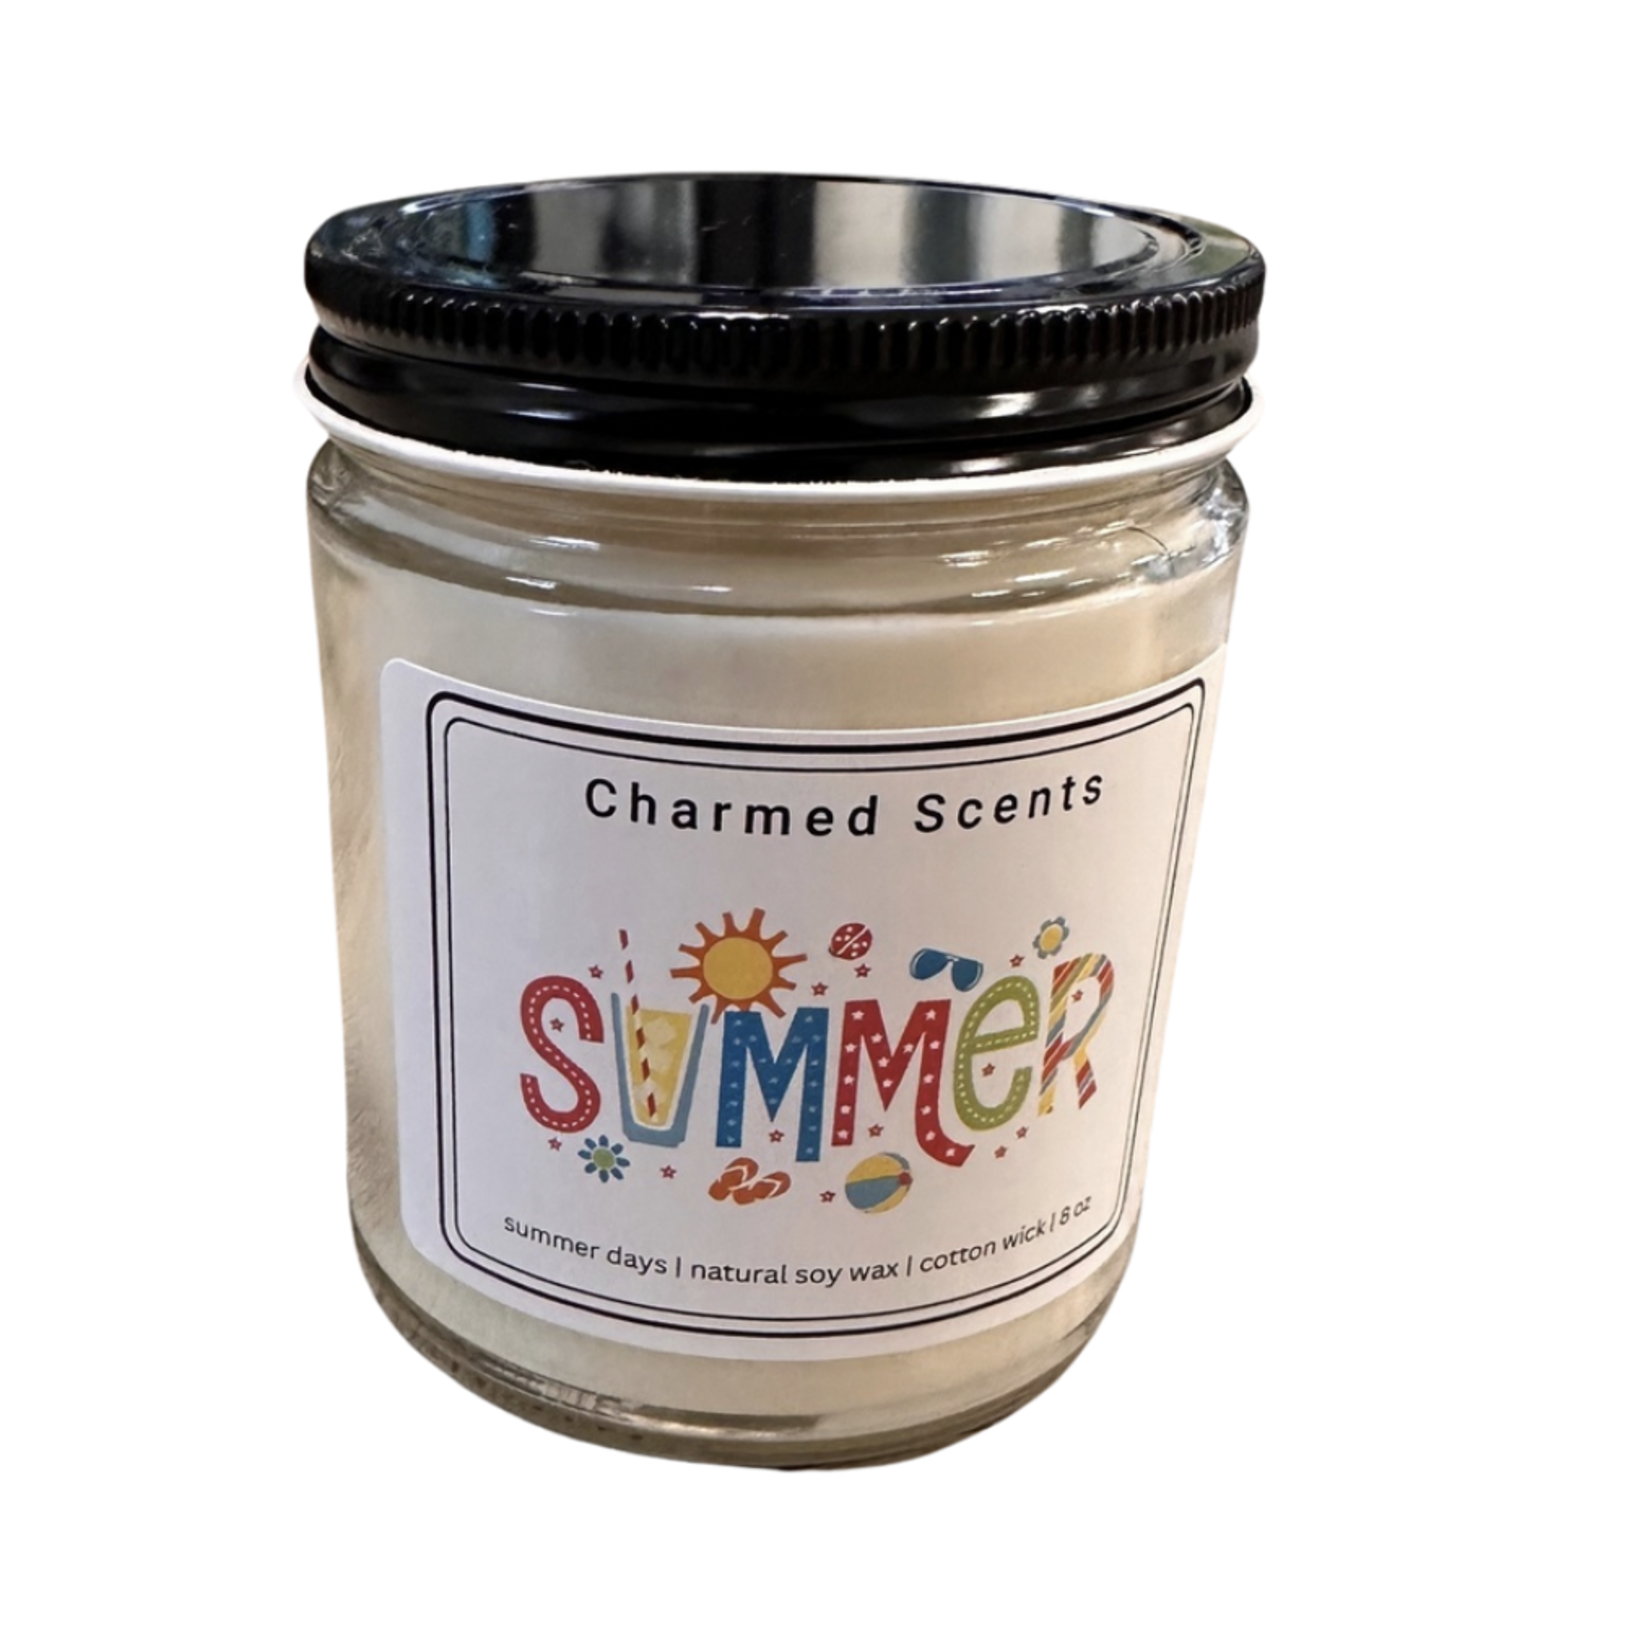 Charmed Scents - 8 oz Soy Candle - Summer